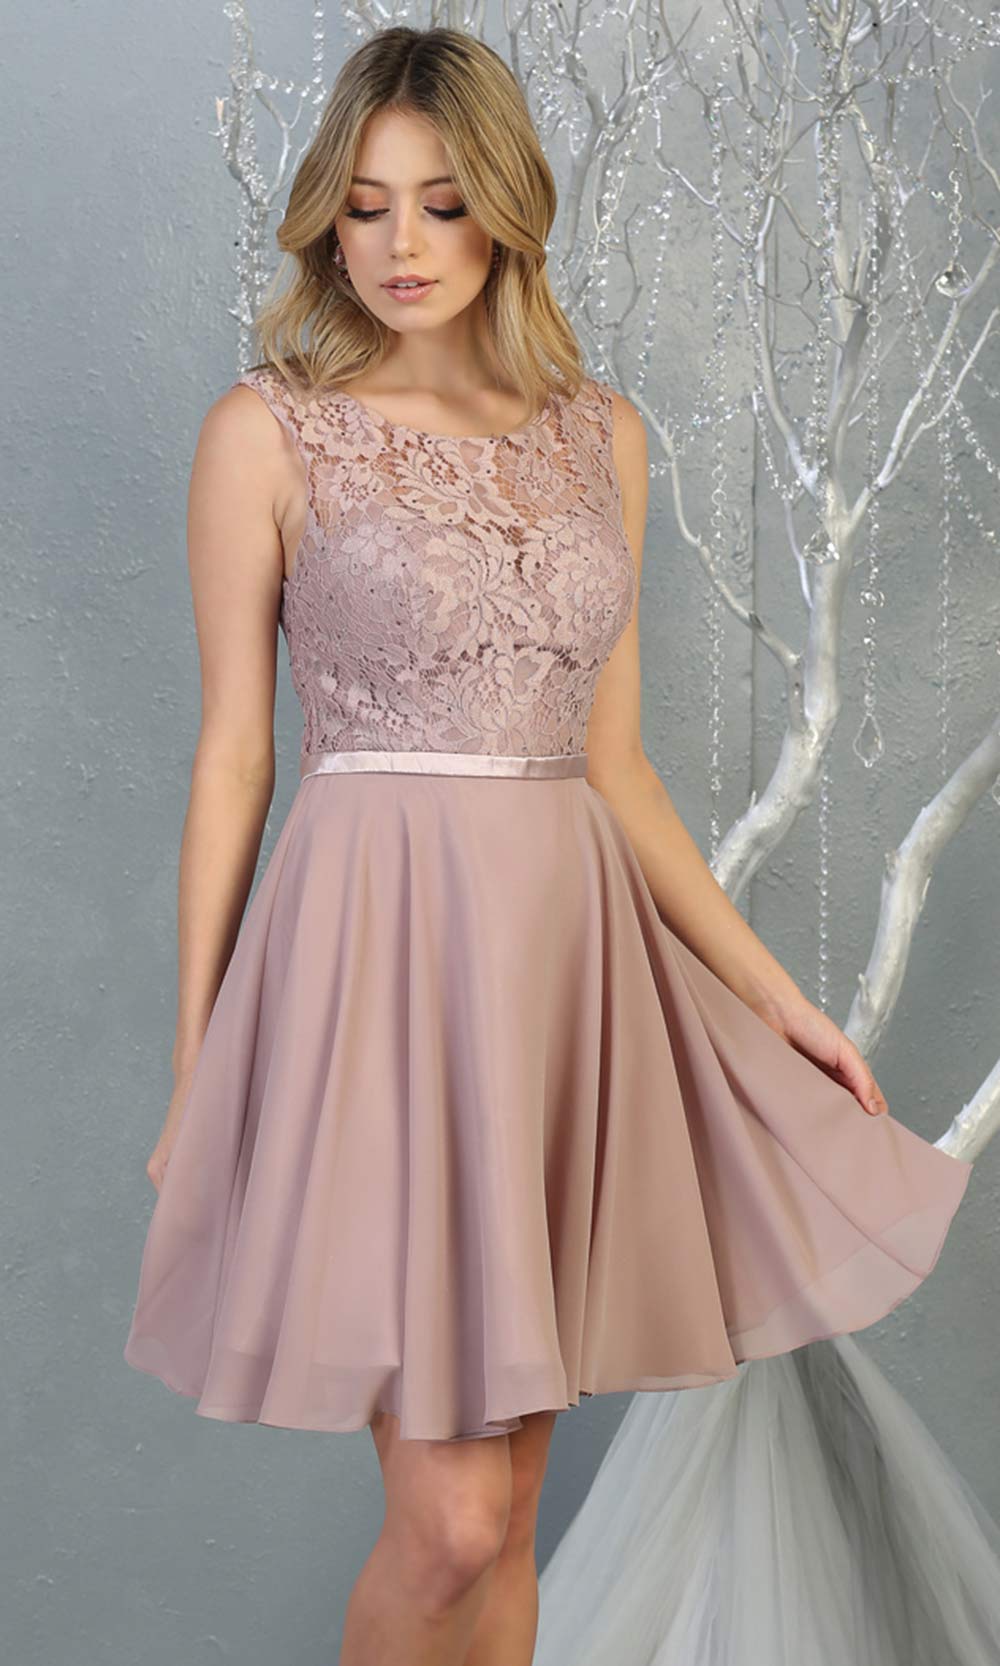 Mayqueen MQ1814 short mauve pink high neck flowy grade 8 graduation dress w/ corset & simple skirt. Dusty rose party dress is perfect for prom, graduation, grade 8 grad, confirmation dress, bat mitzvah dress, damas. Plus sizes avail for grad dress.jpggrade 8 grad dresses, graduation dresses